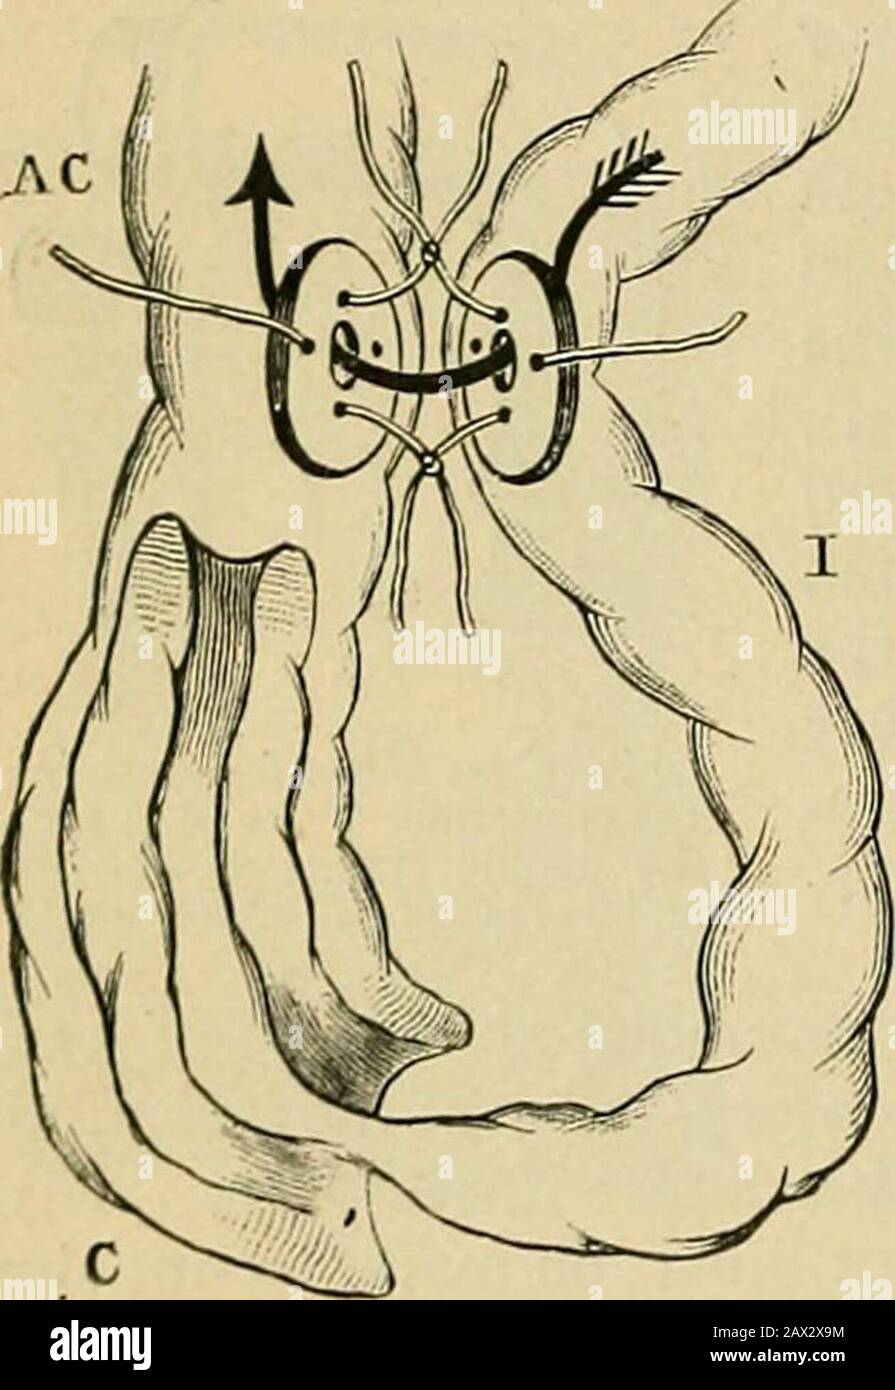 Surgery; its theory and practice . action just below theapex of the intussusceptum; orbetter, try to squeeze out the in-tussusceptum by kneading andpressure from below. Reductionmay possibly be aided by insuffla-tion of the rectum with air or hy-drogen. If adhesions have formed,try to break them down by gentlyinsinuating a probe between thecontiguous serous surfaces. Afterreduction search for any rent in theperitoneal coat and bring it together by suture and seal with anomentum graft. Reduction failirg, the following courses areopen: i. Exclusion of the intussusception by leaving it in situand Stock Photo